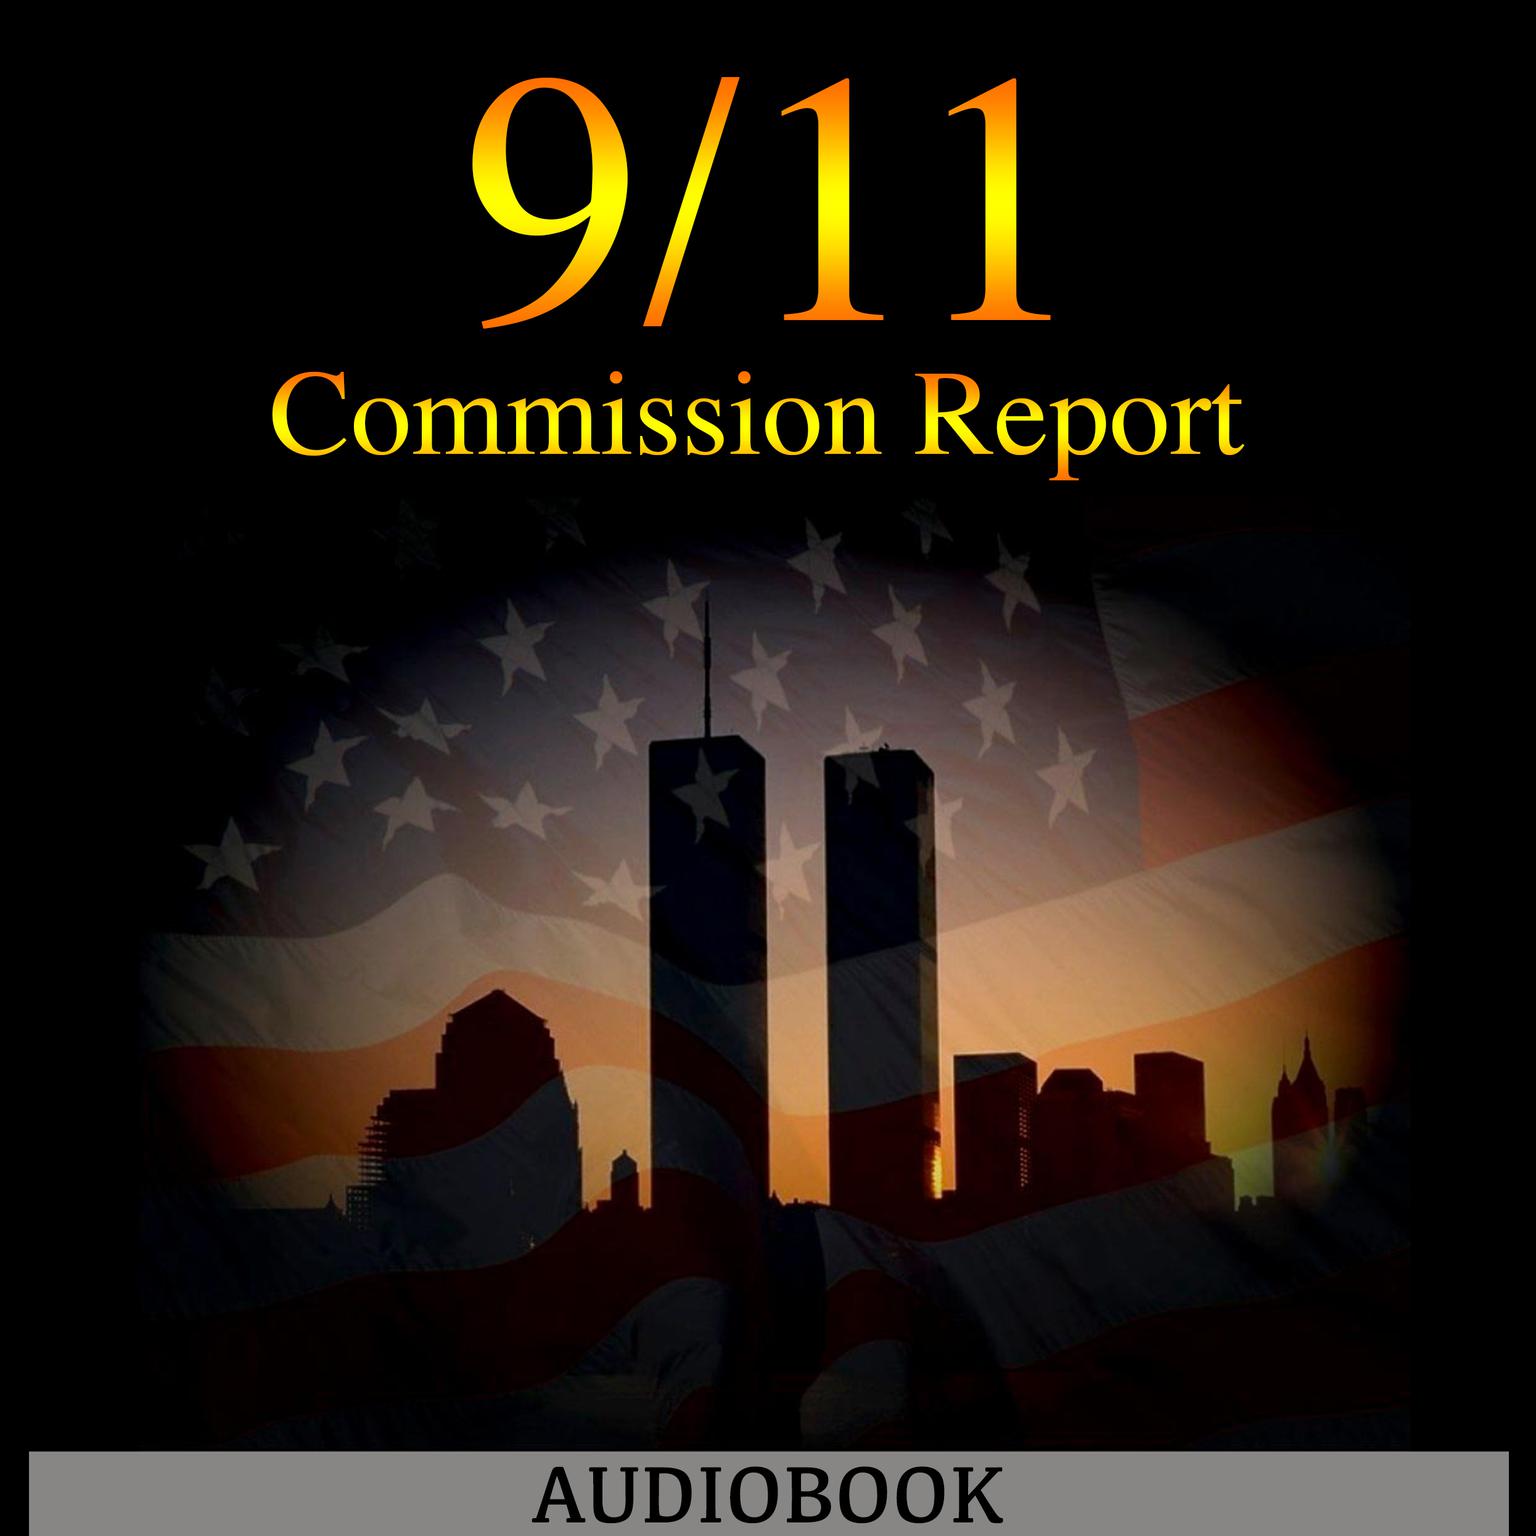 The 9/11 Commission Report Audiobook, by The 9/11 Commission